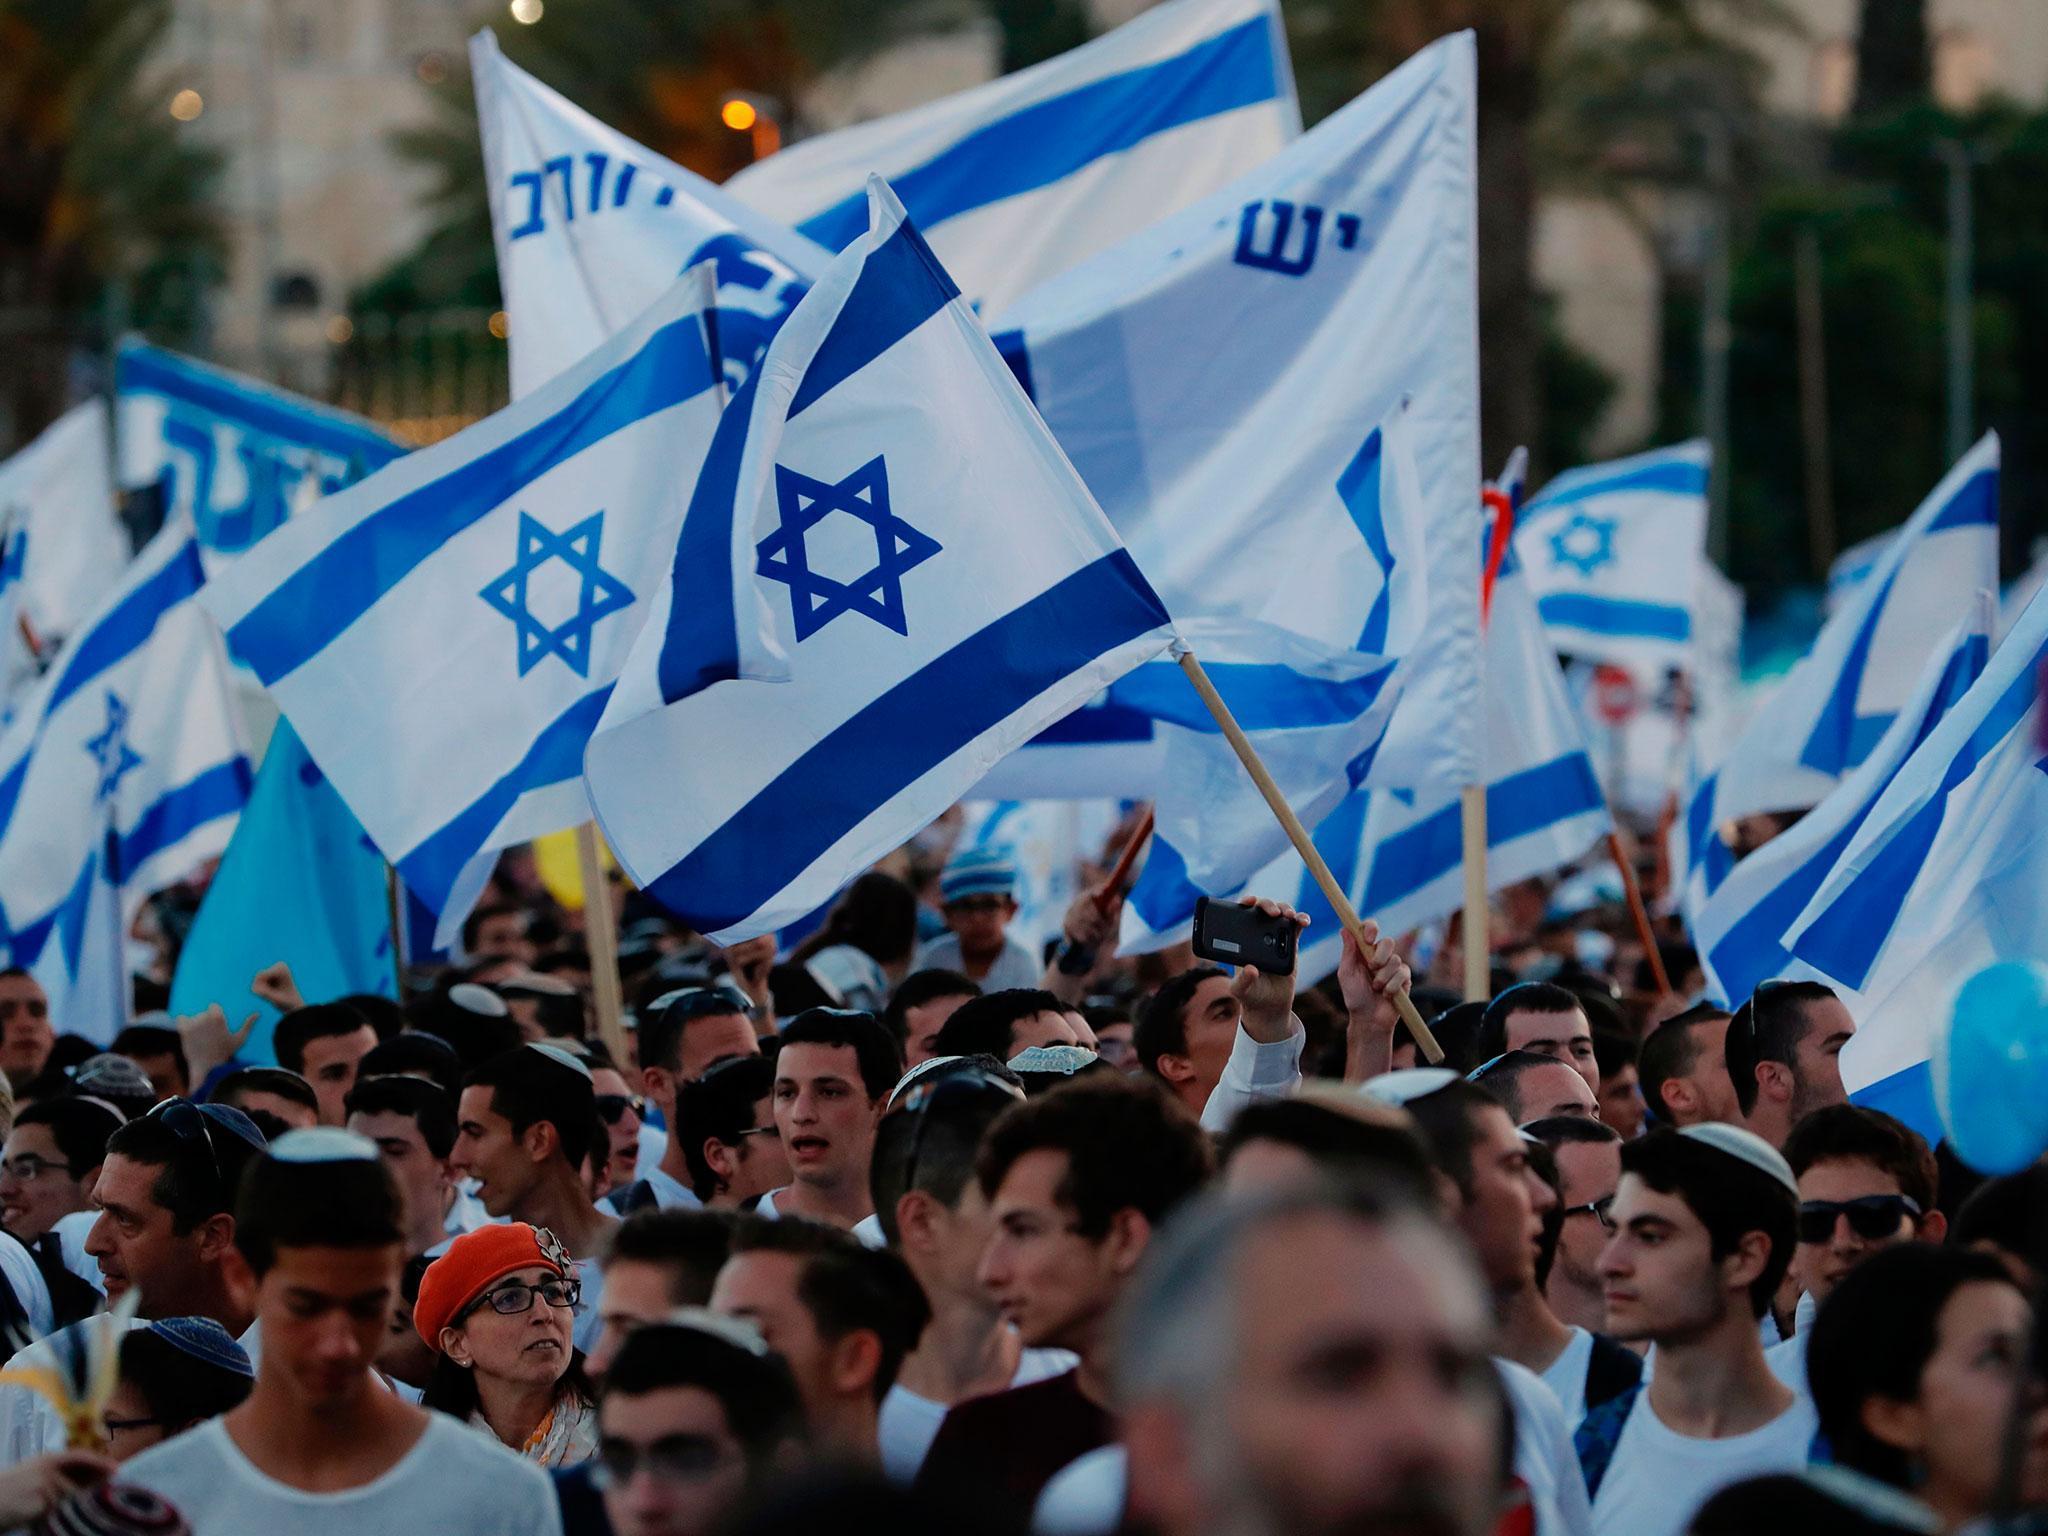 Far-right Israeli nationalists demonstrate in Jerusalem's Old City to commemorate Jerusalem Day, marking the establishment of Israeli control over the Old City following its capture in the Six-Day War of 1967